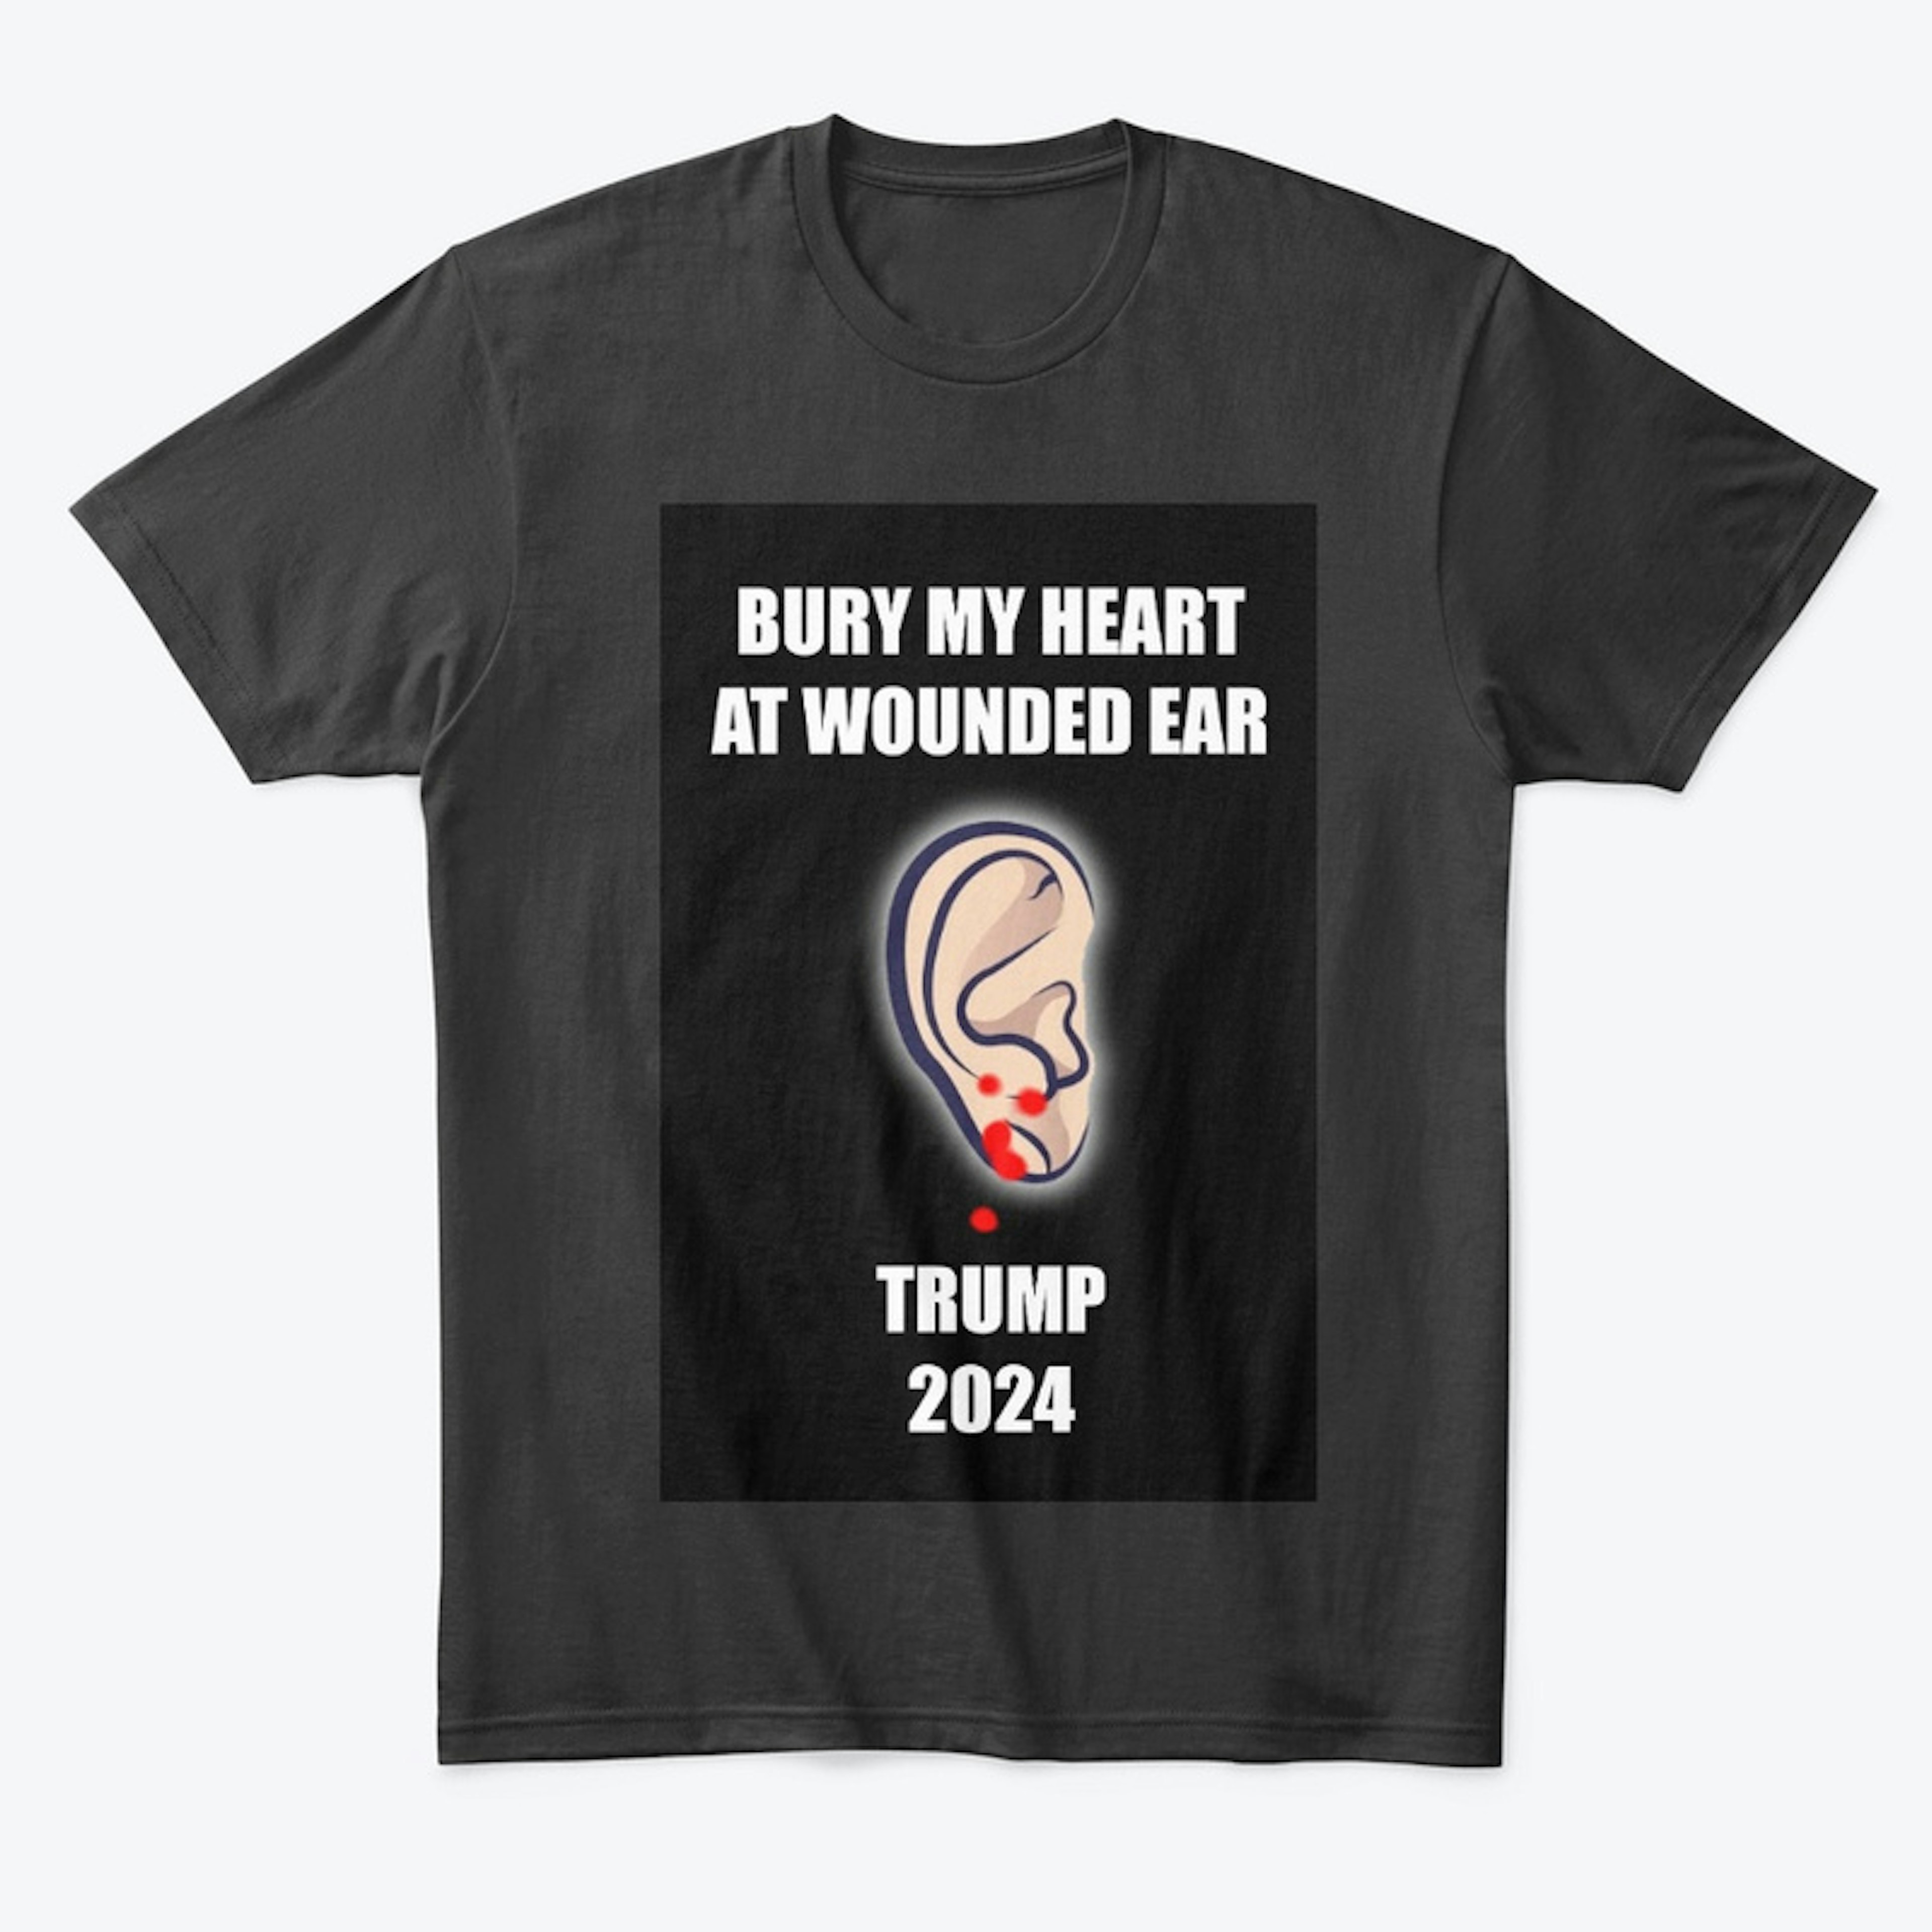 Bury My Heart at Wounded Ear Tee